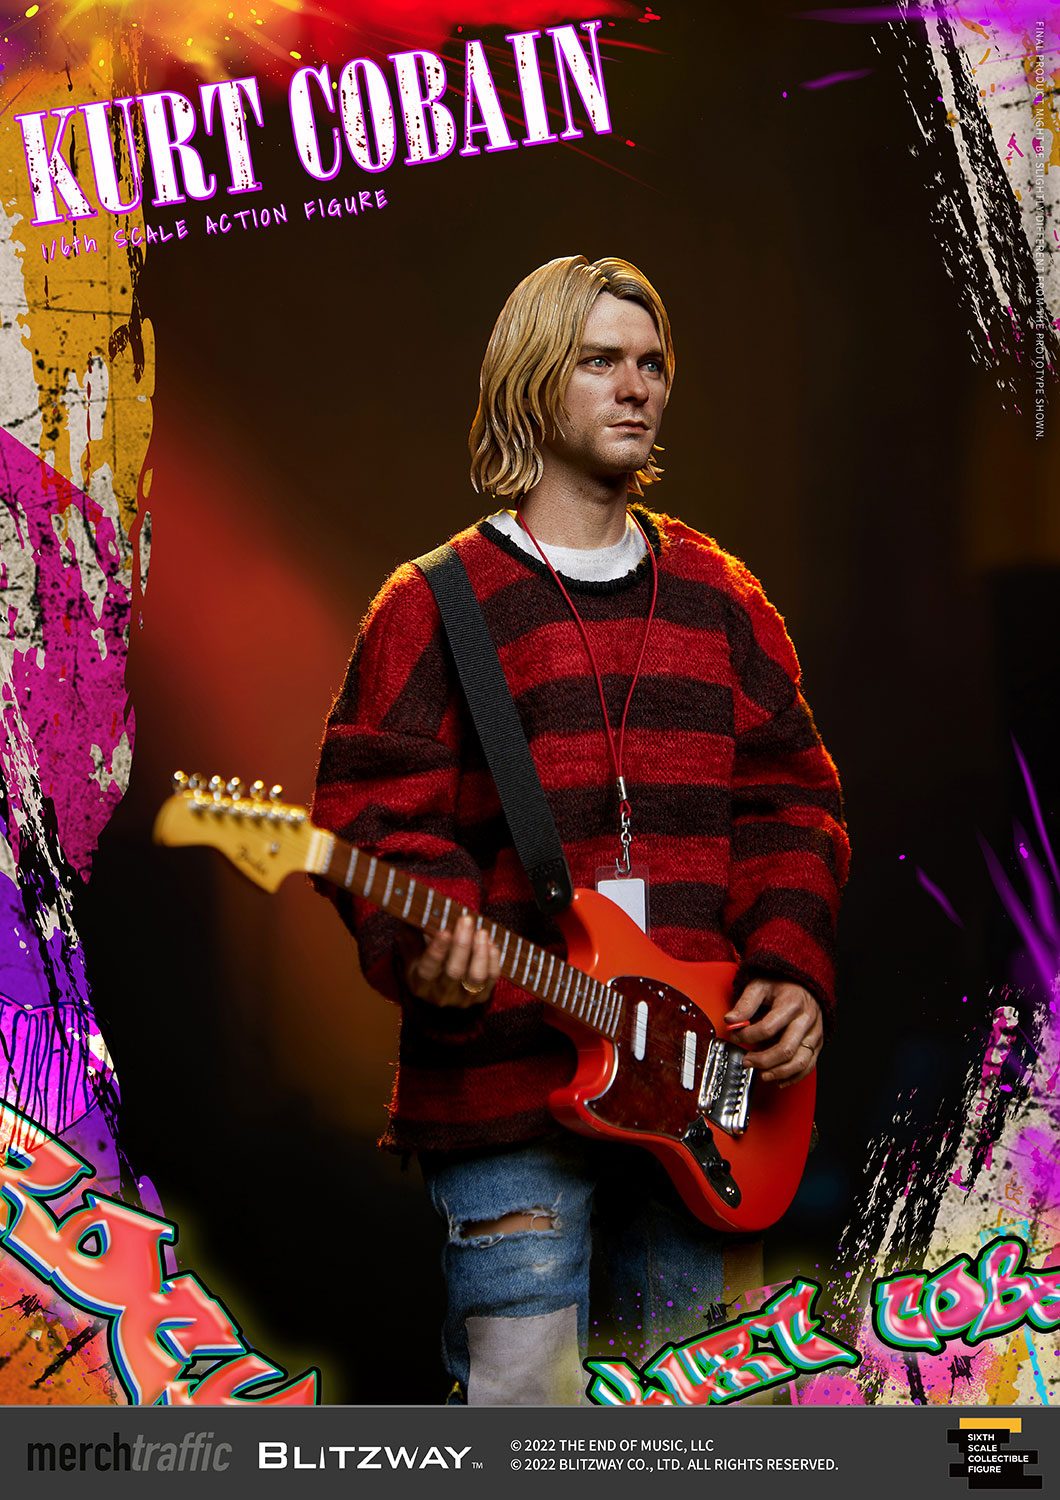 Welcome To Heck The Kurt Cobain Biographical Documentary Gets Animated   TOKYOPOP